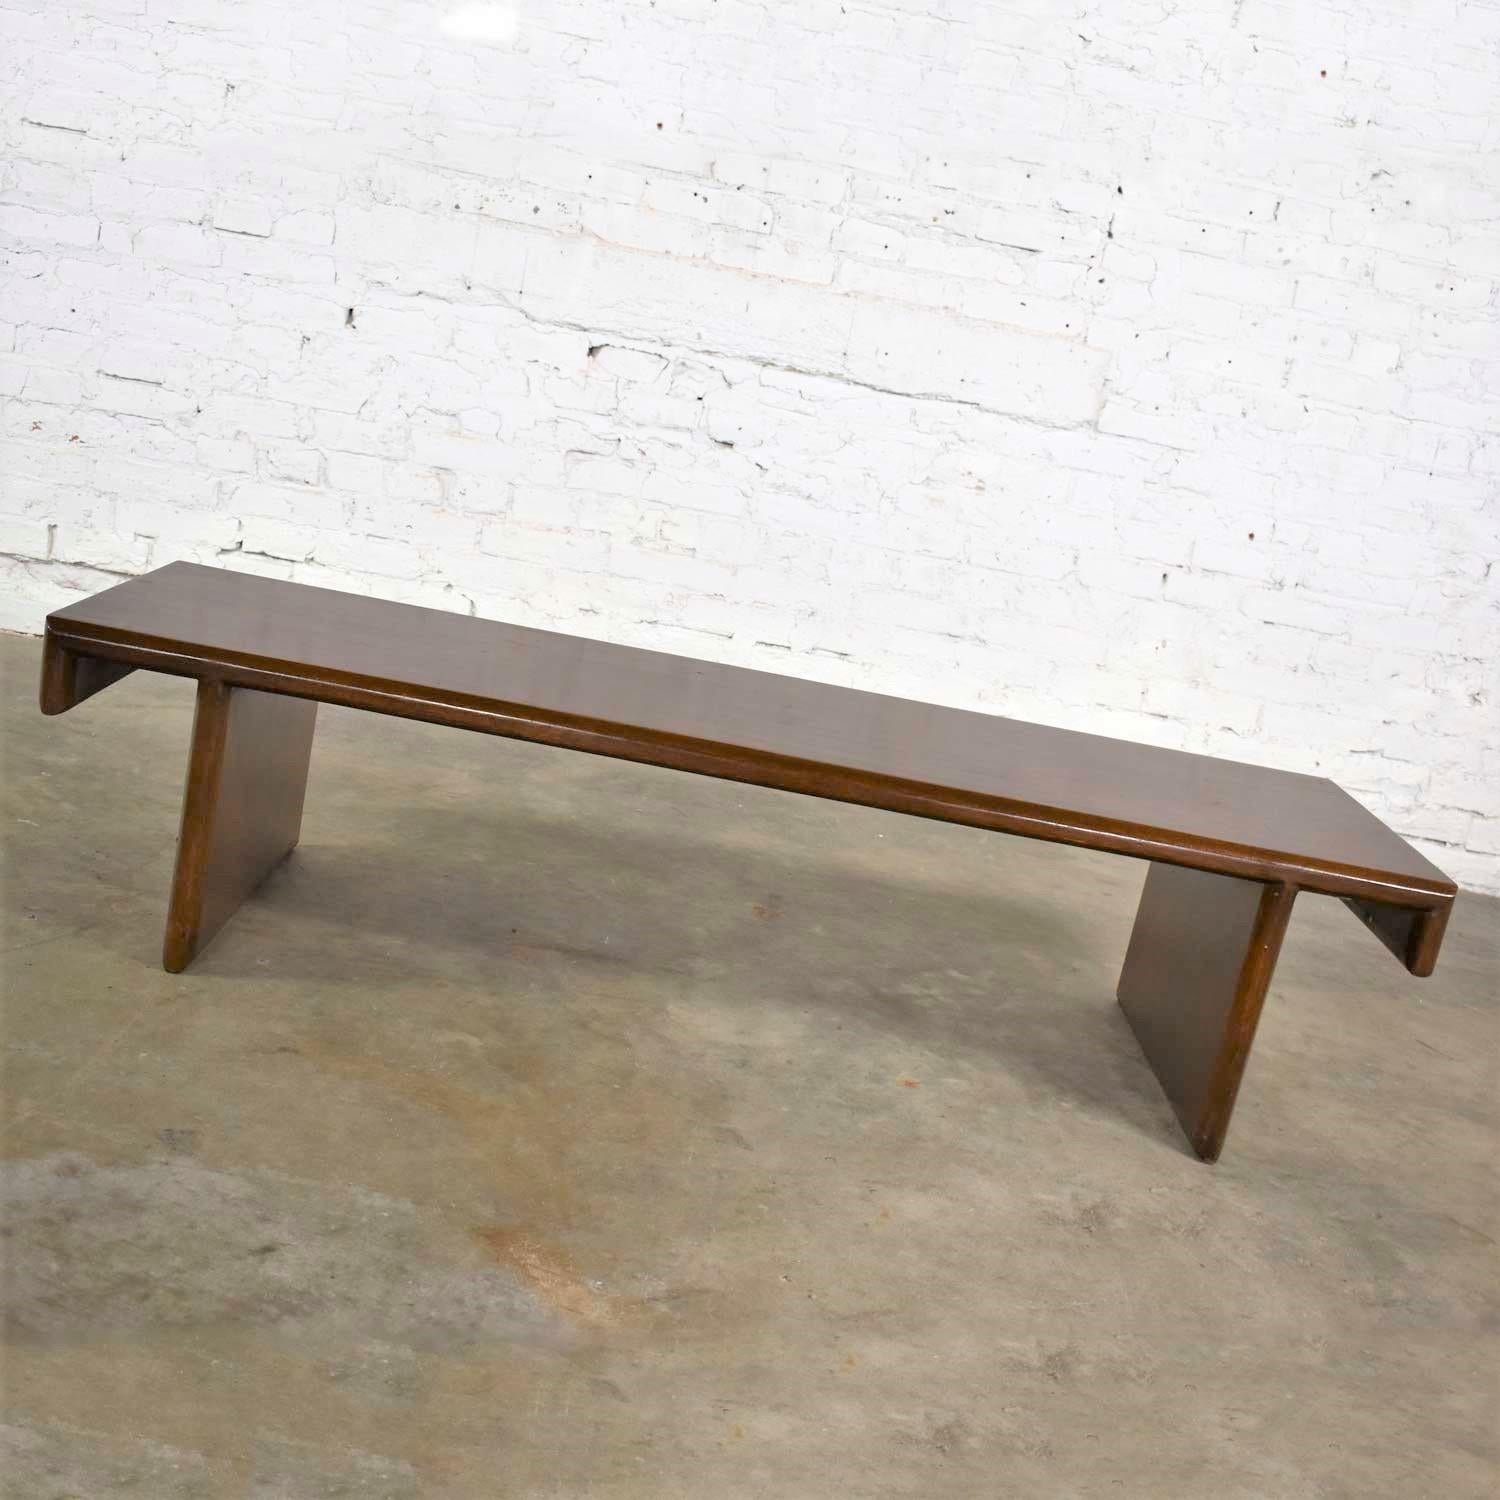 20th Century Vintage Walnut Stained Bench Coffee Table Style of Frank Lloyd Wright for Henred